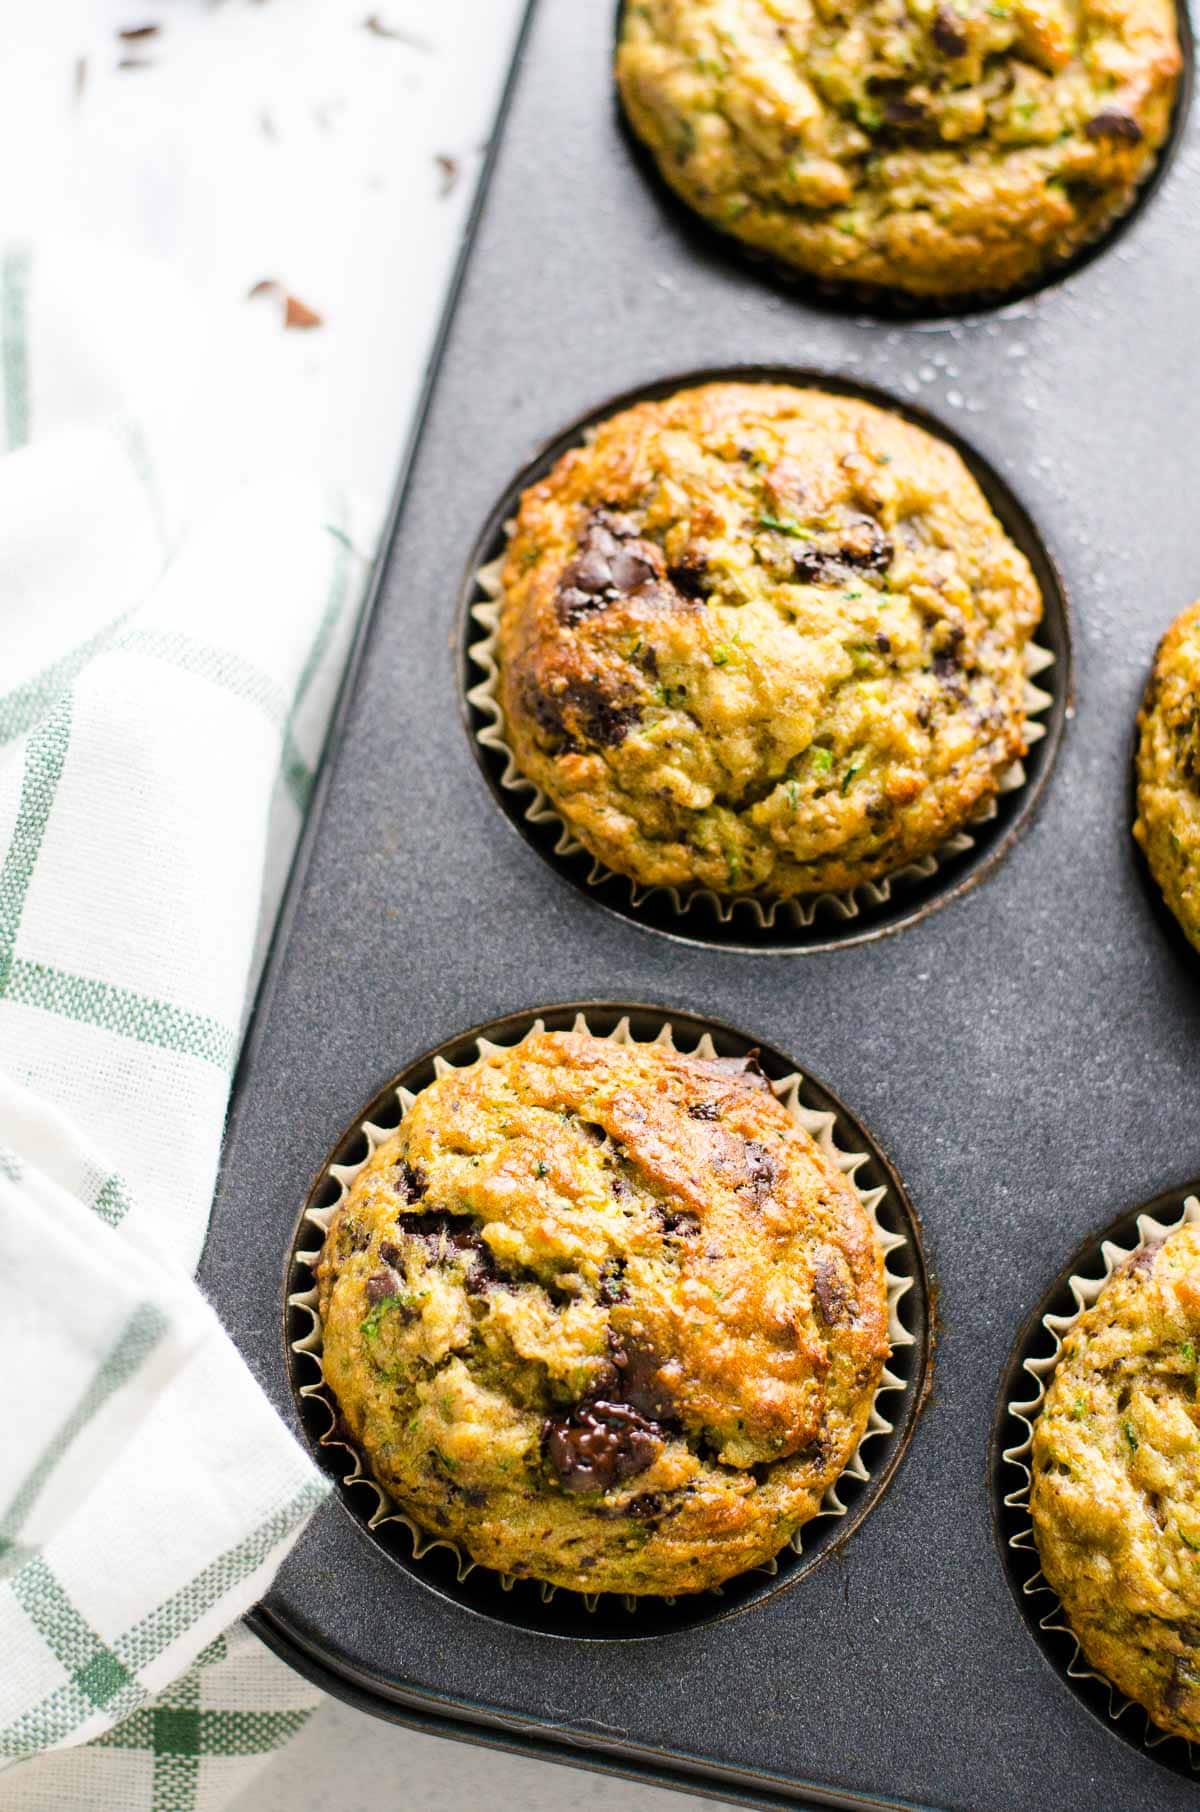 Healthy banana zucchini muffins in a muffin tin with a towel.